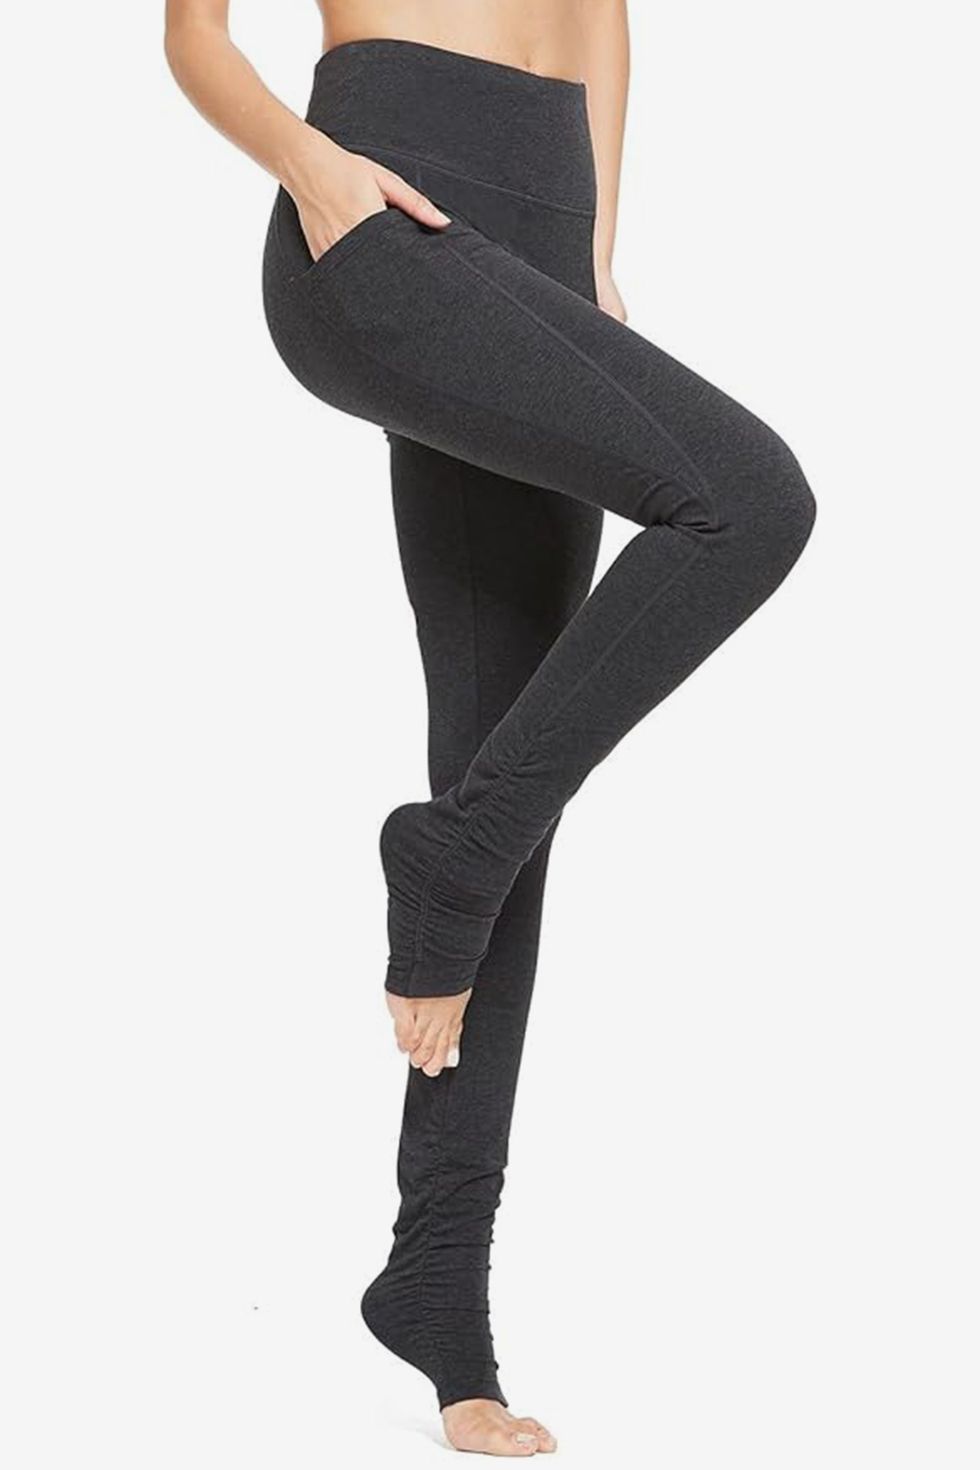 Elegant Choise Fleece Lined Women High Waisted Winter Leggings Warm Thick  Thermal Stretchy Seamless Full Length Leggings - Ultra Soft Tummy Control  Slimming Yoga Thights Pants,Cropped Leggings 